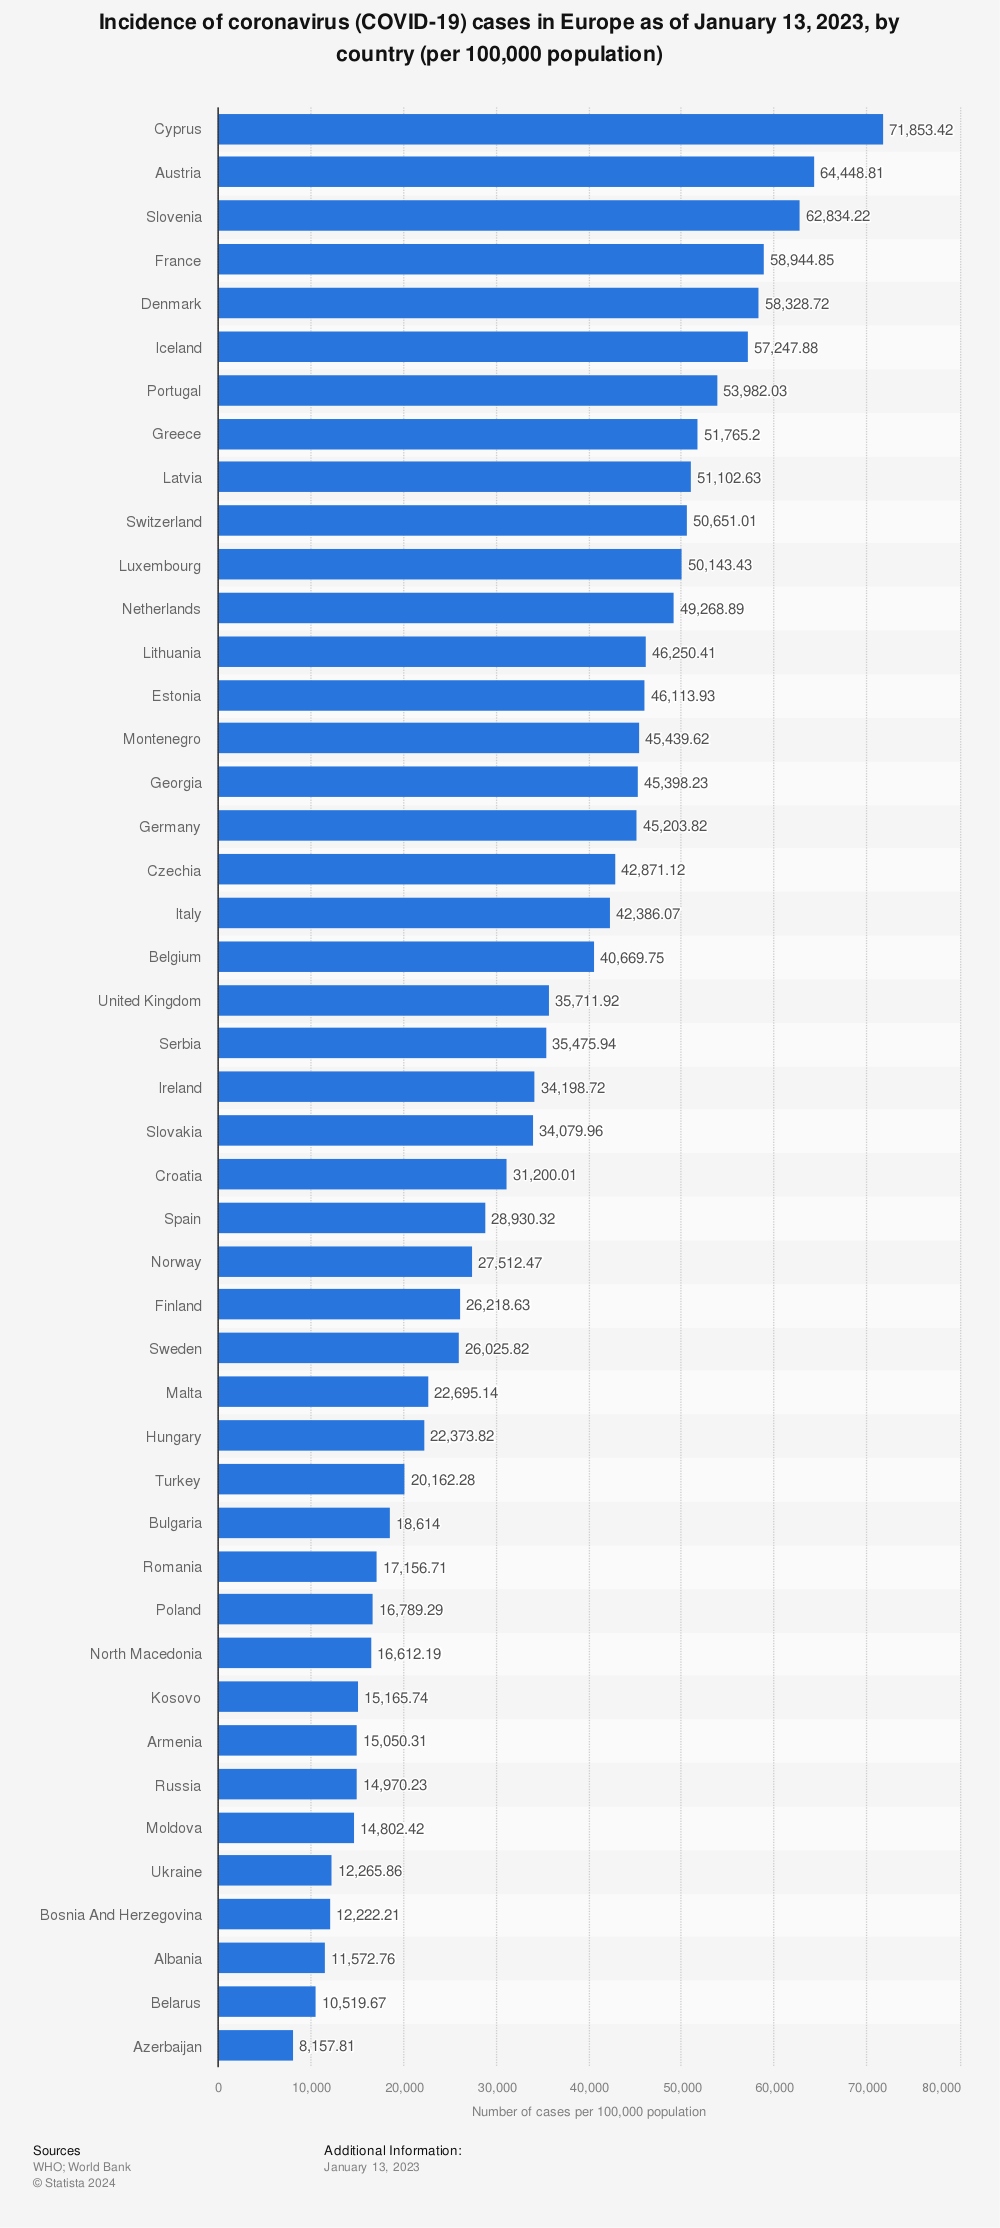 Statistic: Incidence of coronavirus (COVID-19) cases in Europe as of May 8, 2022, by country (per 100,000 population) | Statista